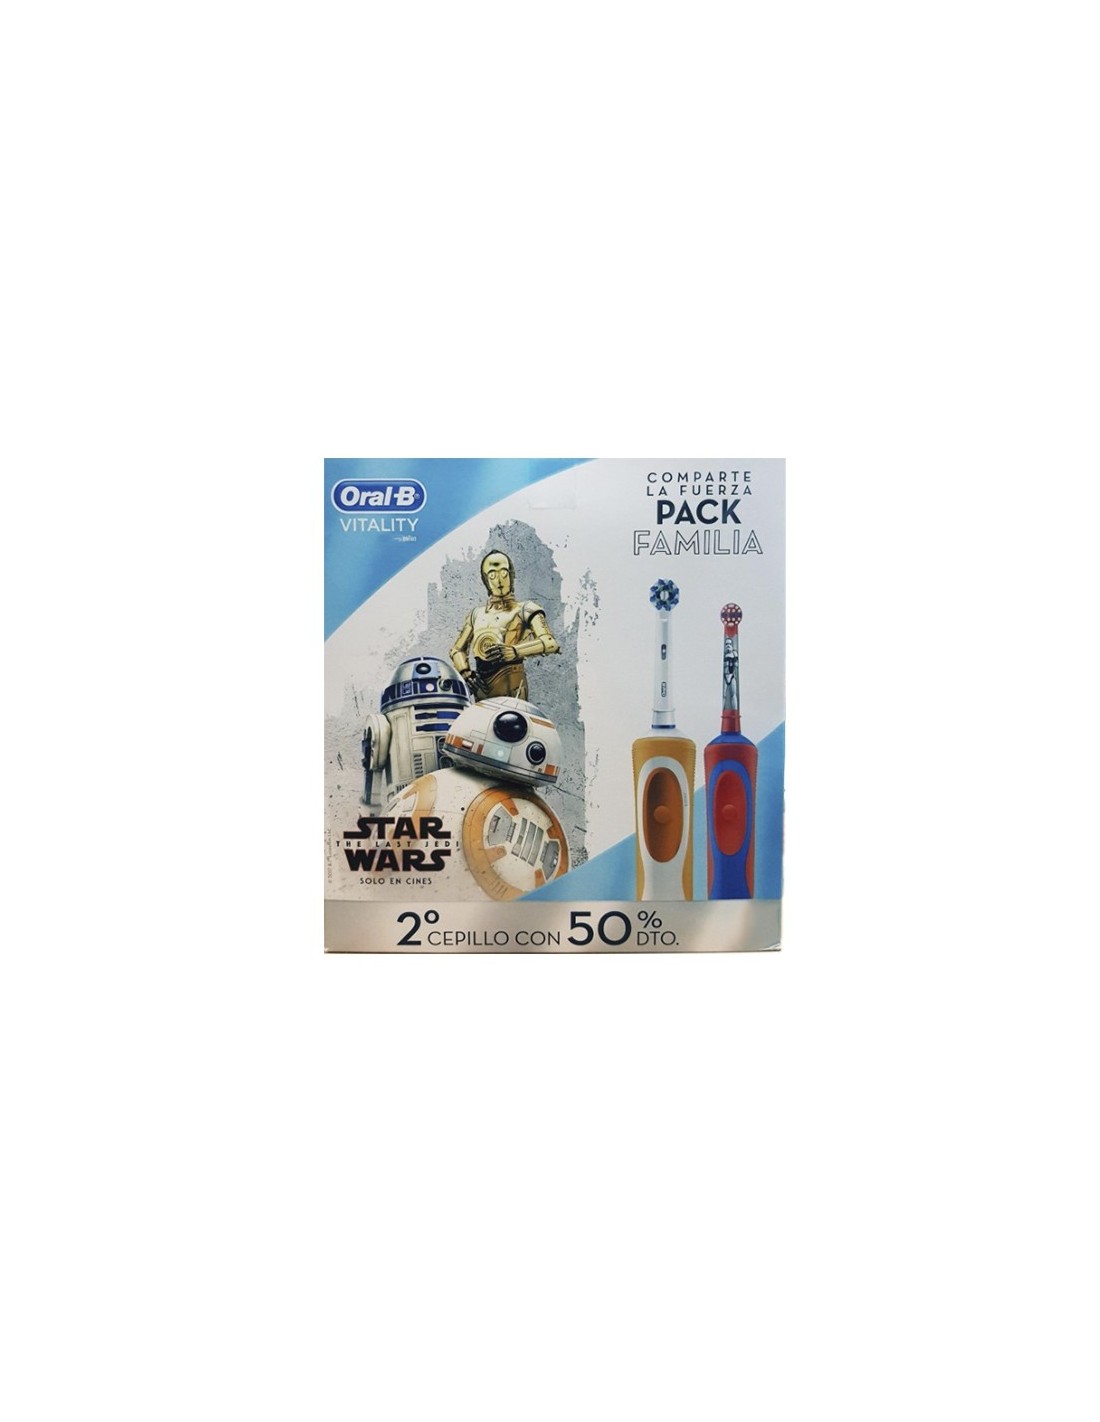 Oral B Pack Familia Cepillo Eléctrico Vitality Crossaction + Stages Power Star Wars